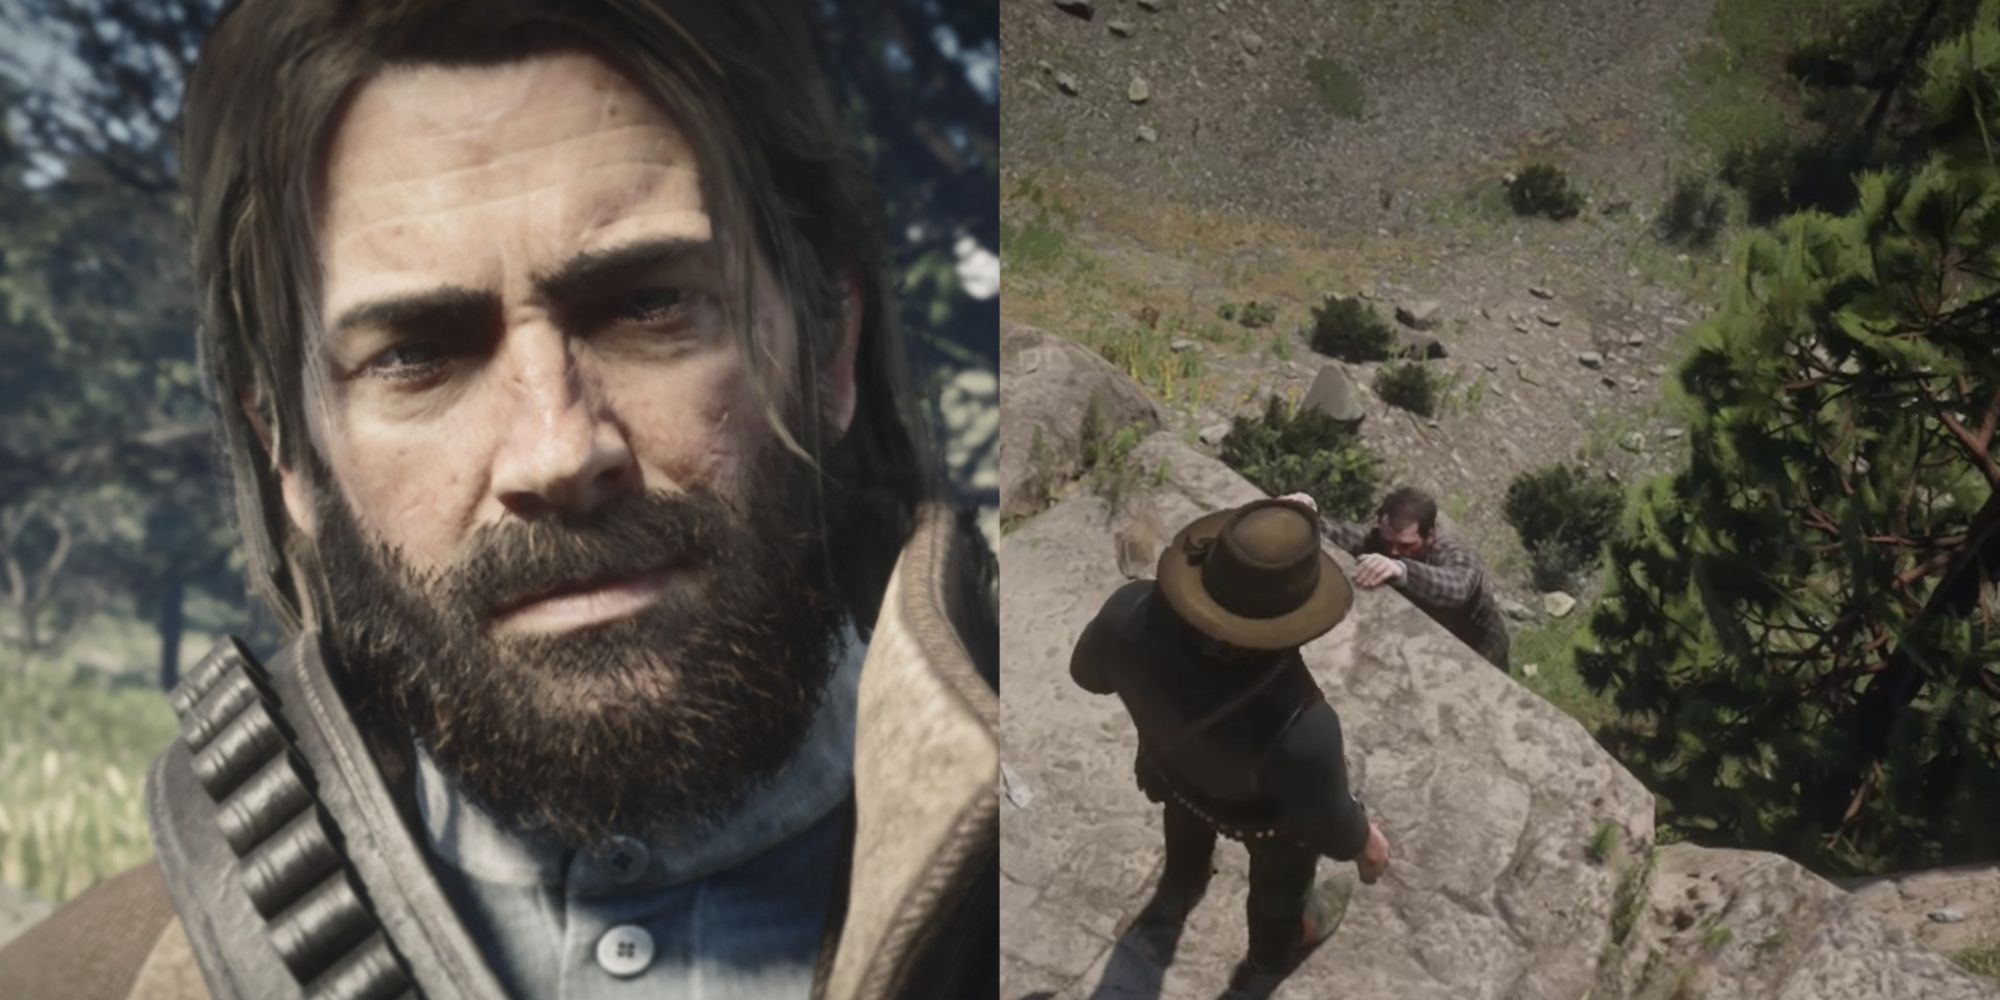 Red Dead Redemption Hardest Choices Featured Split Image Arthur and Man hanging From Cliff